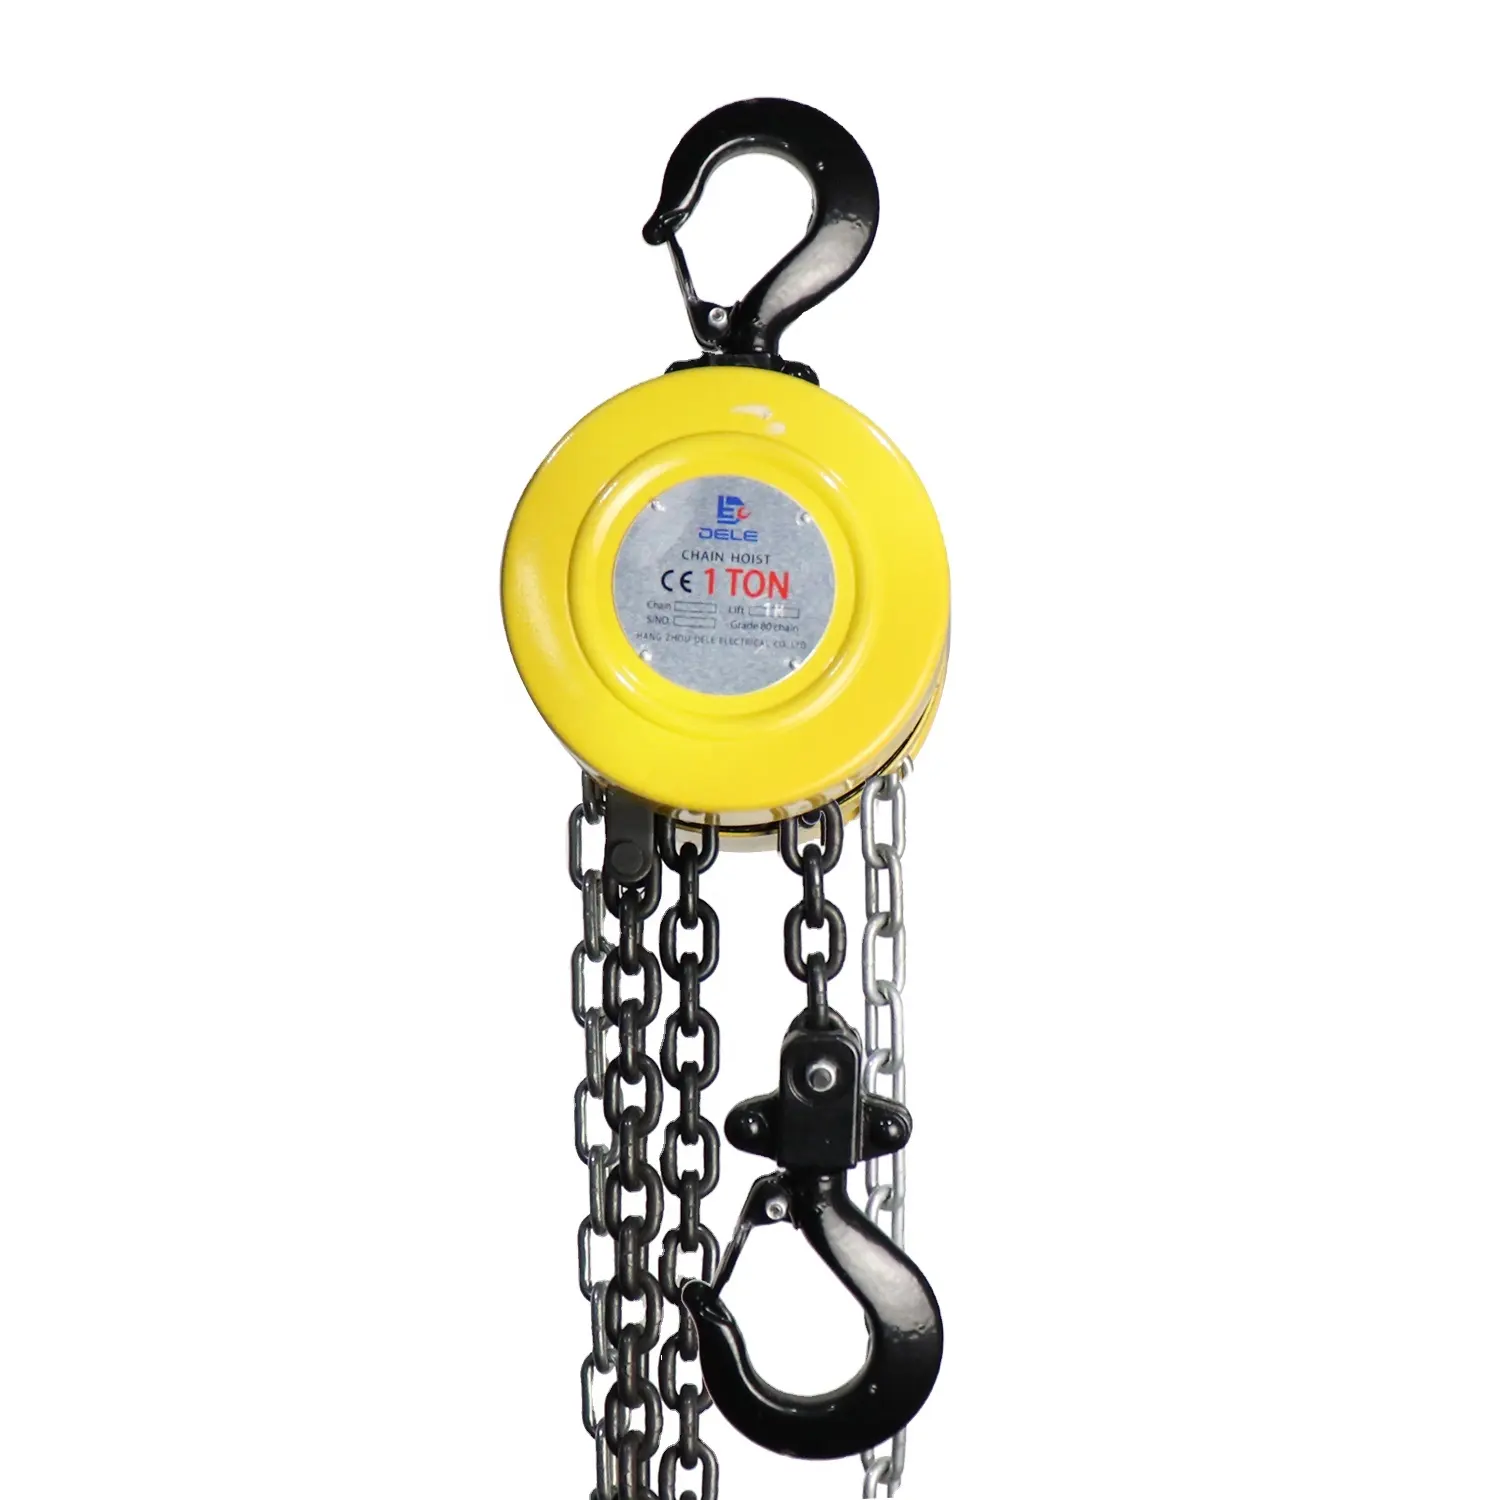 2 Ton Construction Manual Chain Hoist Hand Pulley Gear Core Components New Competitive Price Lift Hoist Roller Shutter Door